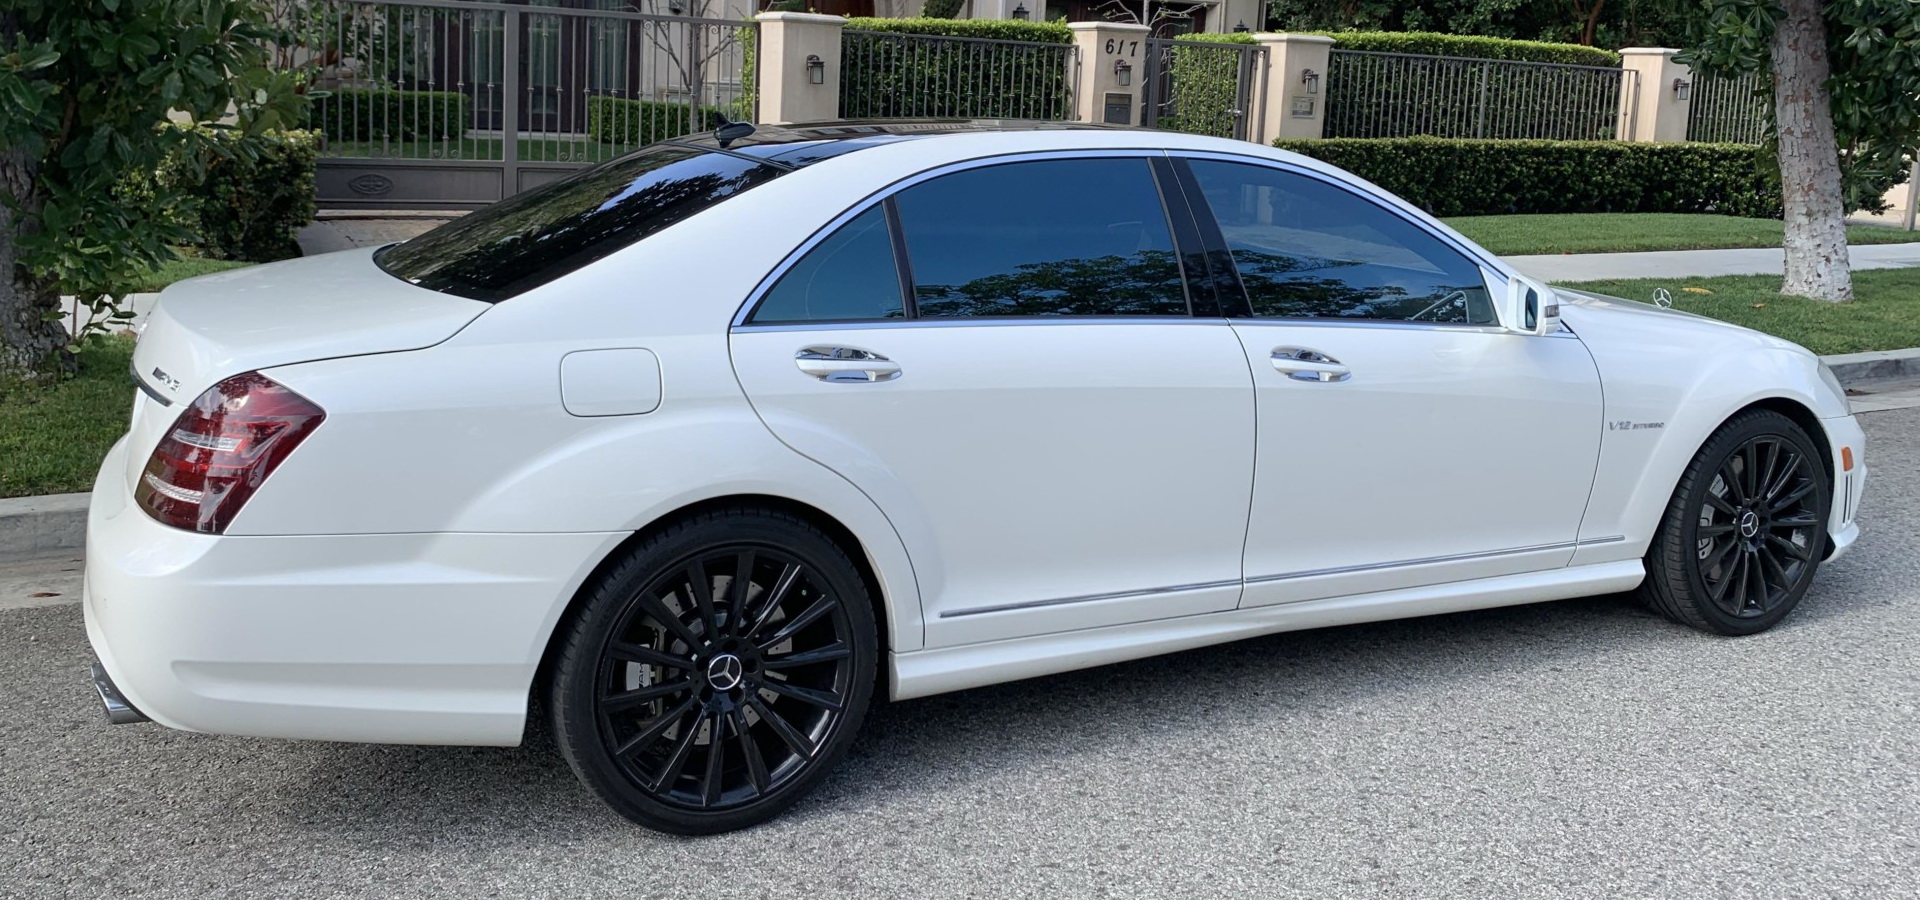 2011 Mercedes S65 Amg Might Just Help You Gain Baller Status